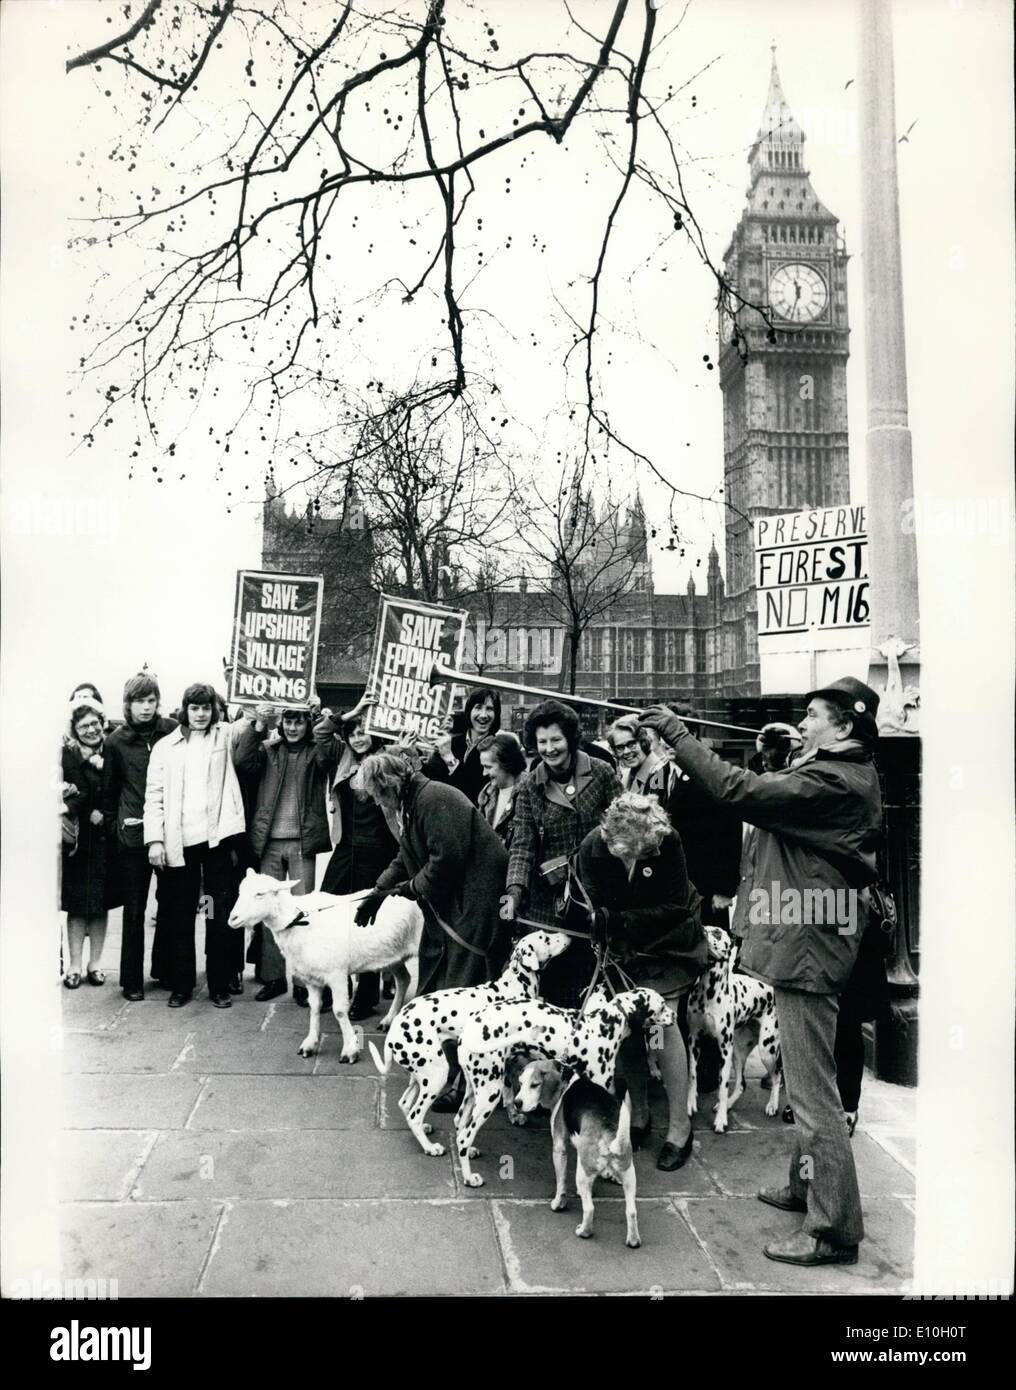 Feb. 02, 1973 - Angry Villagers From Upshire Stage ''Farmland'' Demonstration At The House Of Parliament: Angry villagers from Upshire - an Essex hamlet threatened by a six-lane motorway, today staged a huge ''farmland'' demonstration - a cavalcade of farm vehicles to the House of commons where they handed over a petition signed by more than 8,000 people. Upshire, the Epping Forest village, is faced with destruction by the building of the M 16 motorway. Photo Shows Some of the villagers pictured with their animals as they demonstrate outside the House of Commons today. Stock Photo